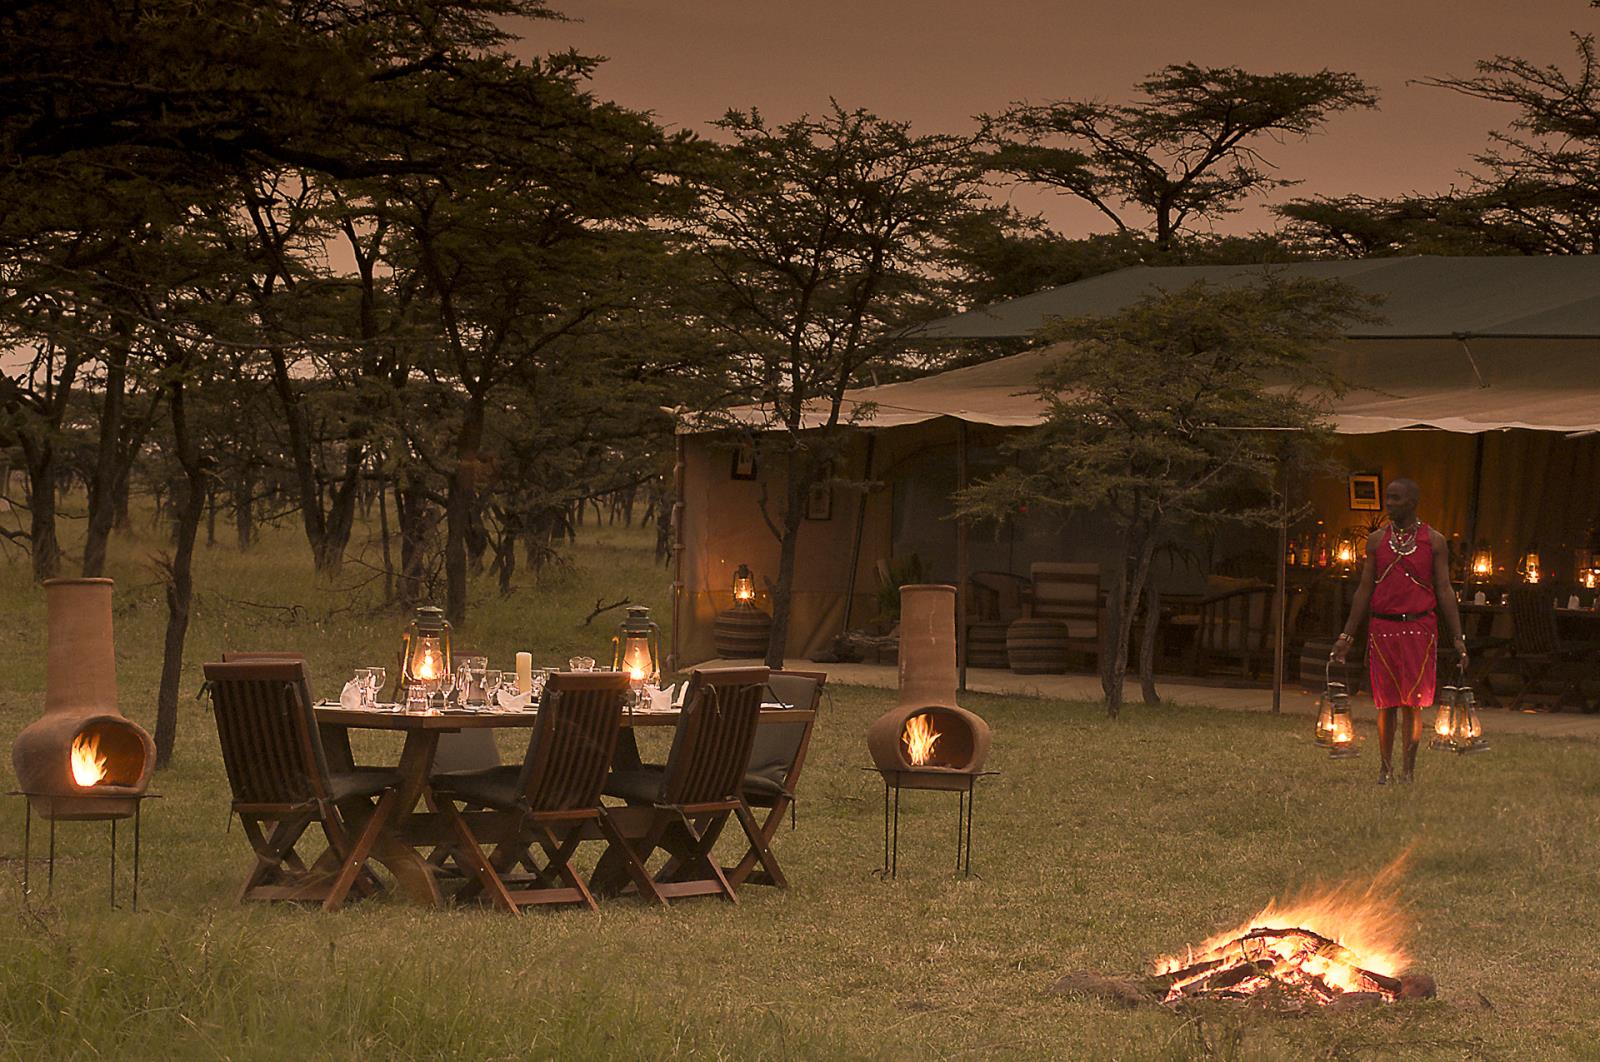 Dinner by the fire - Kicheche Bush Camp